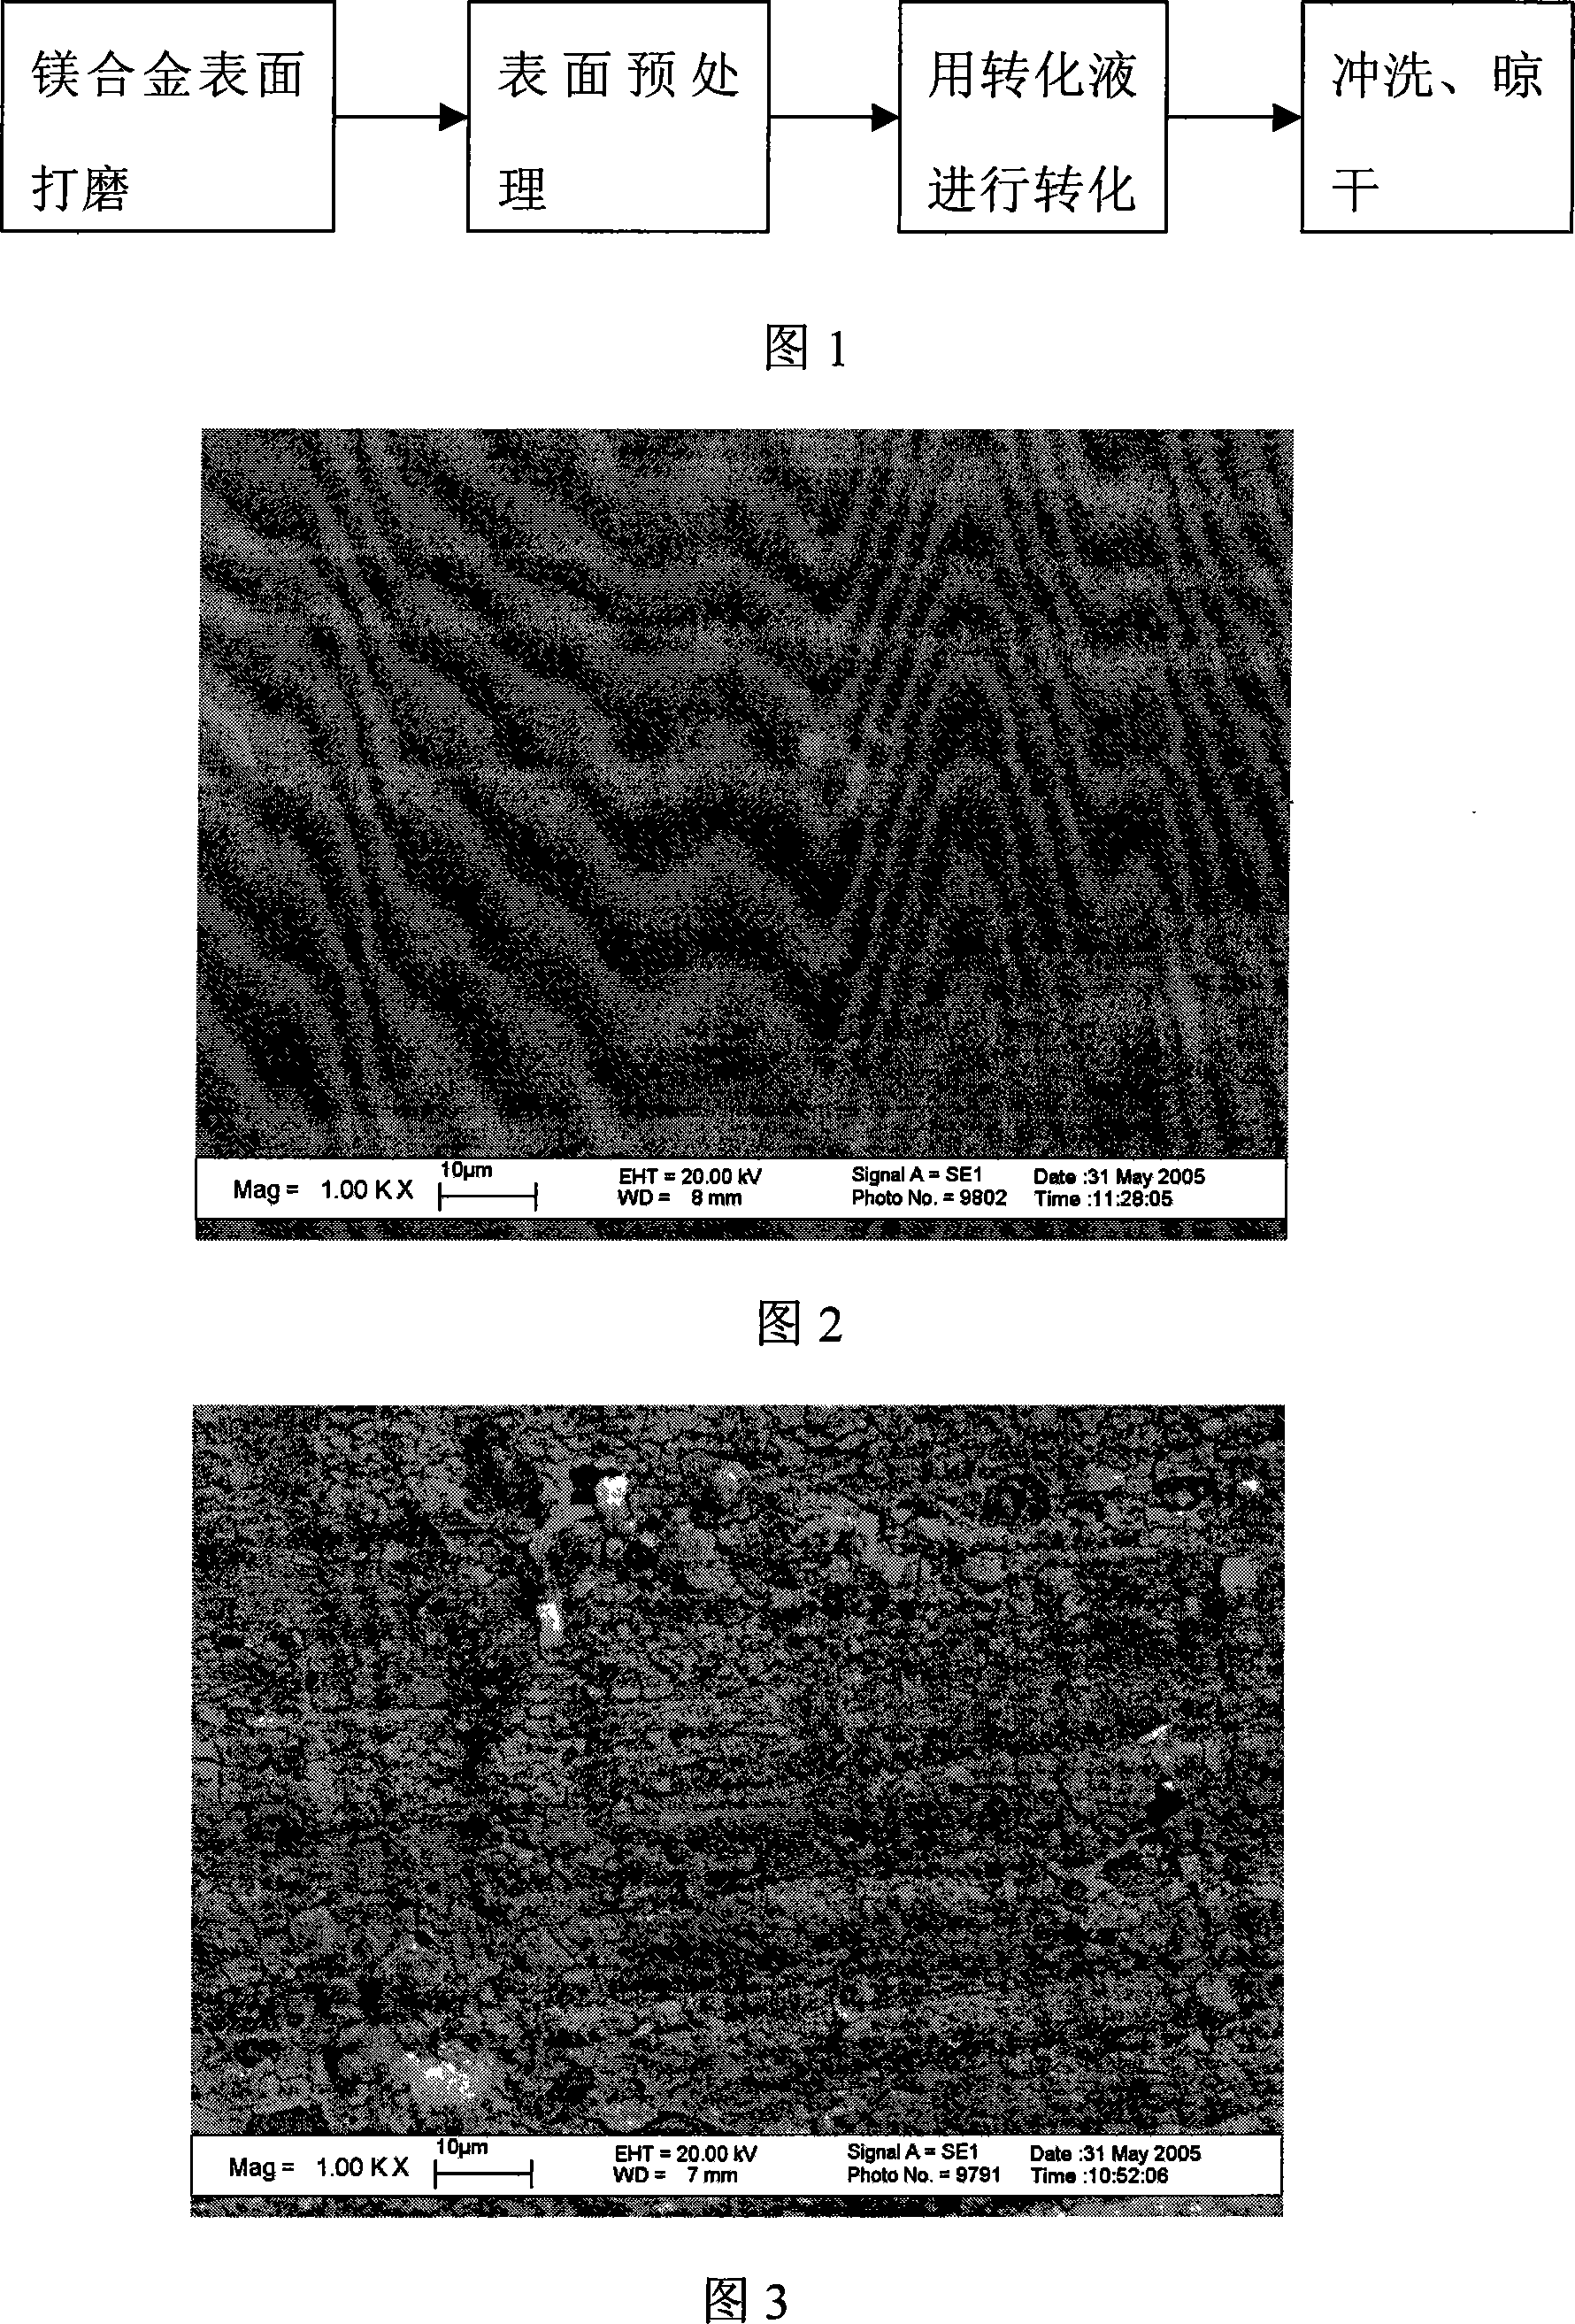 Non-chromium treatment fluid for preparation of corrosion-resistant oxidation film on magnesium alloy surface and method of use thereof